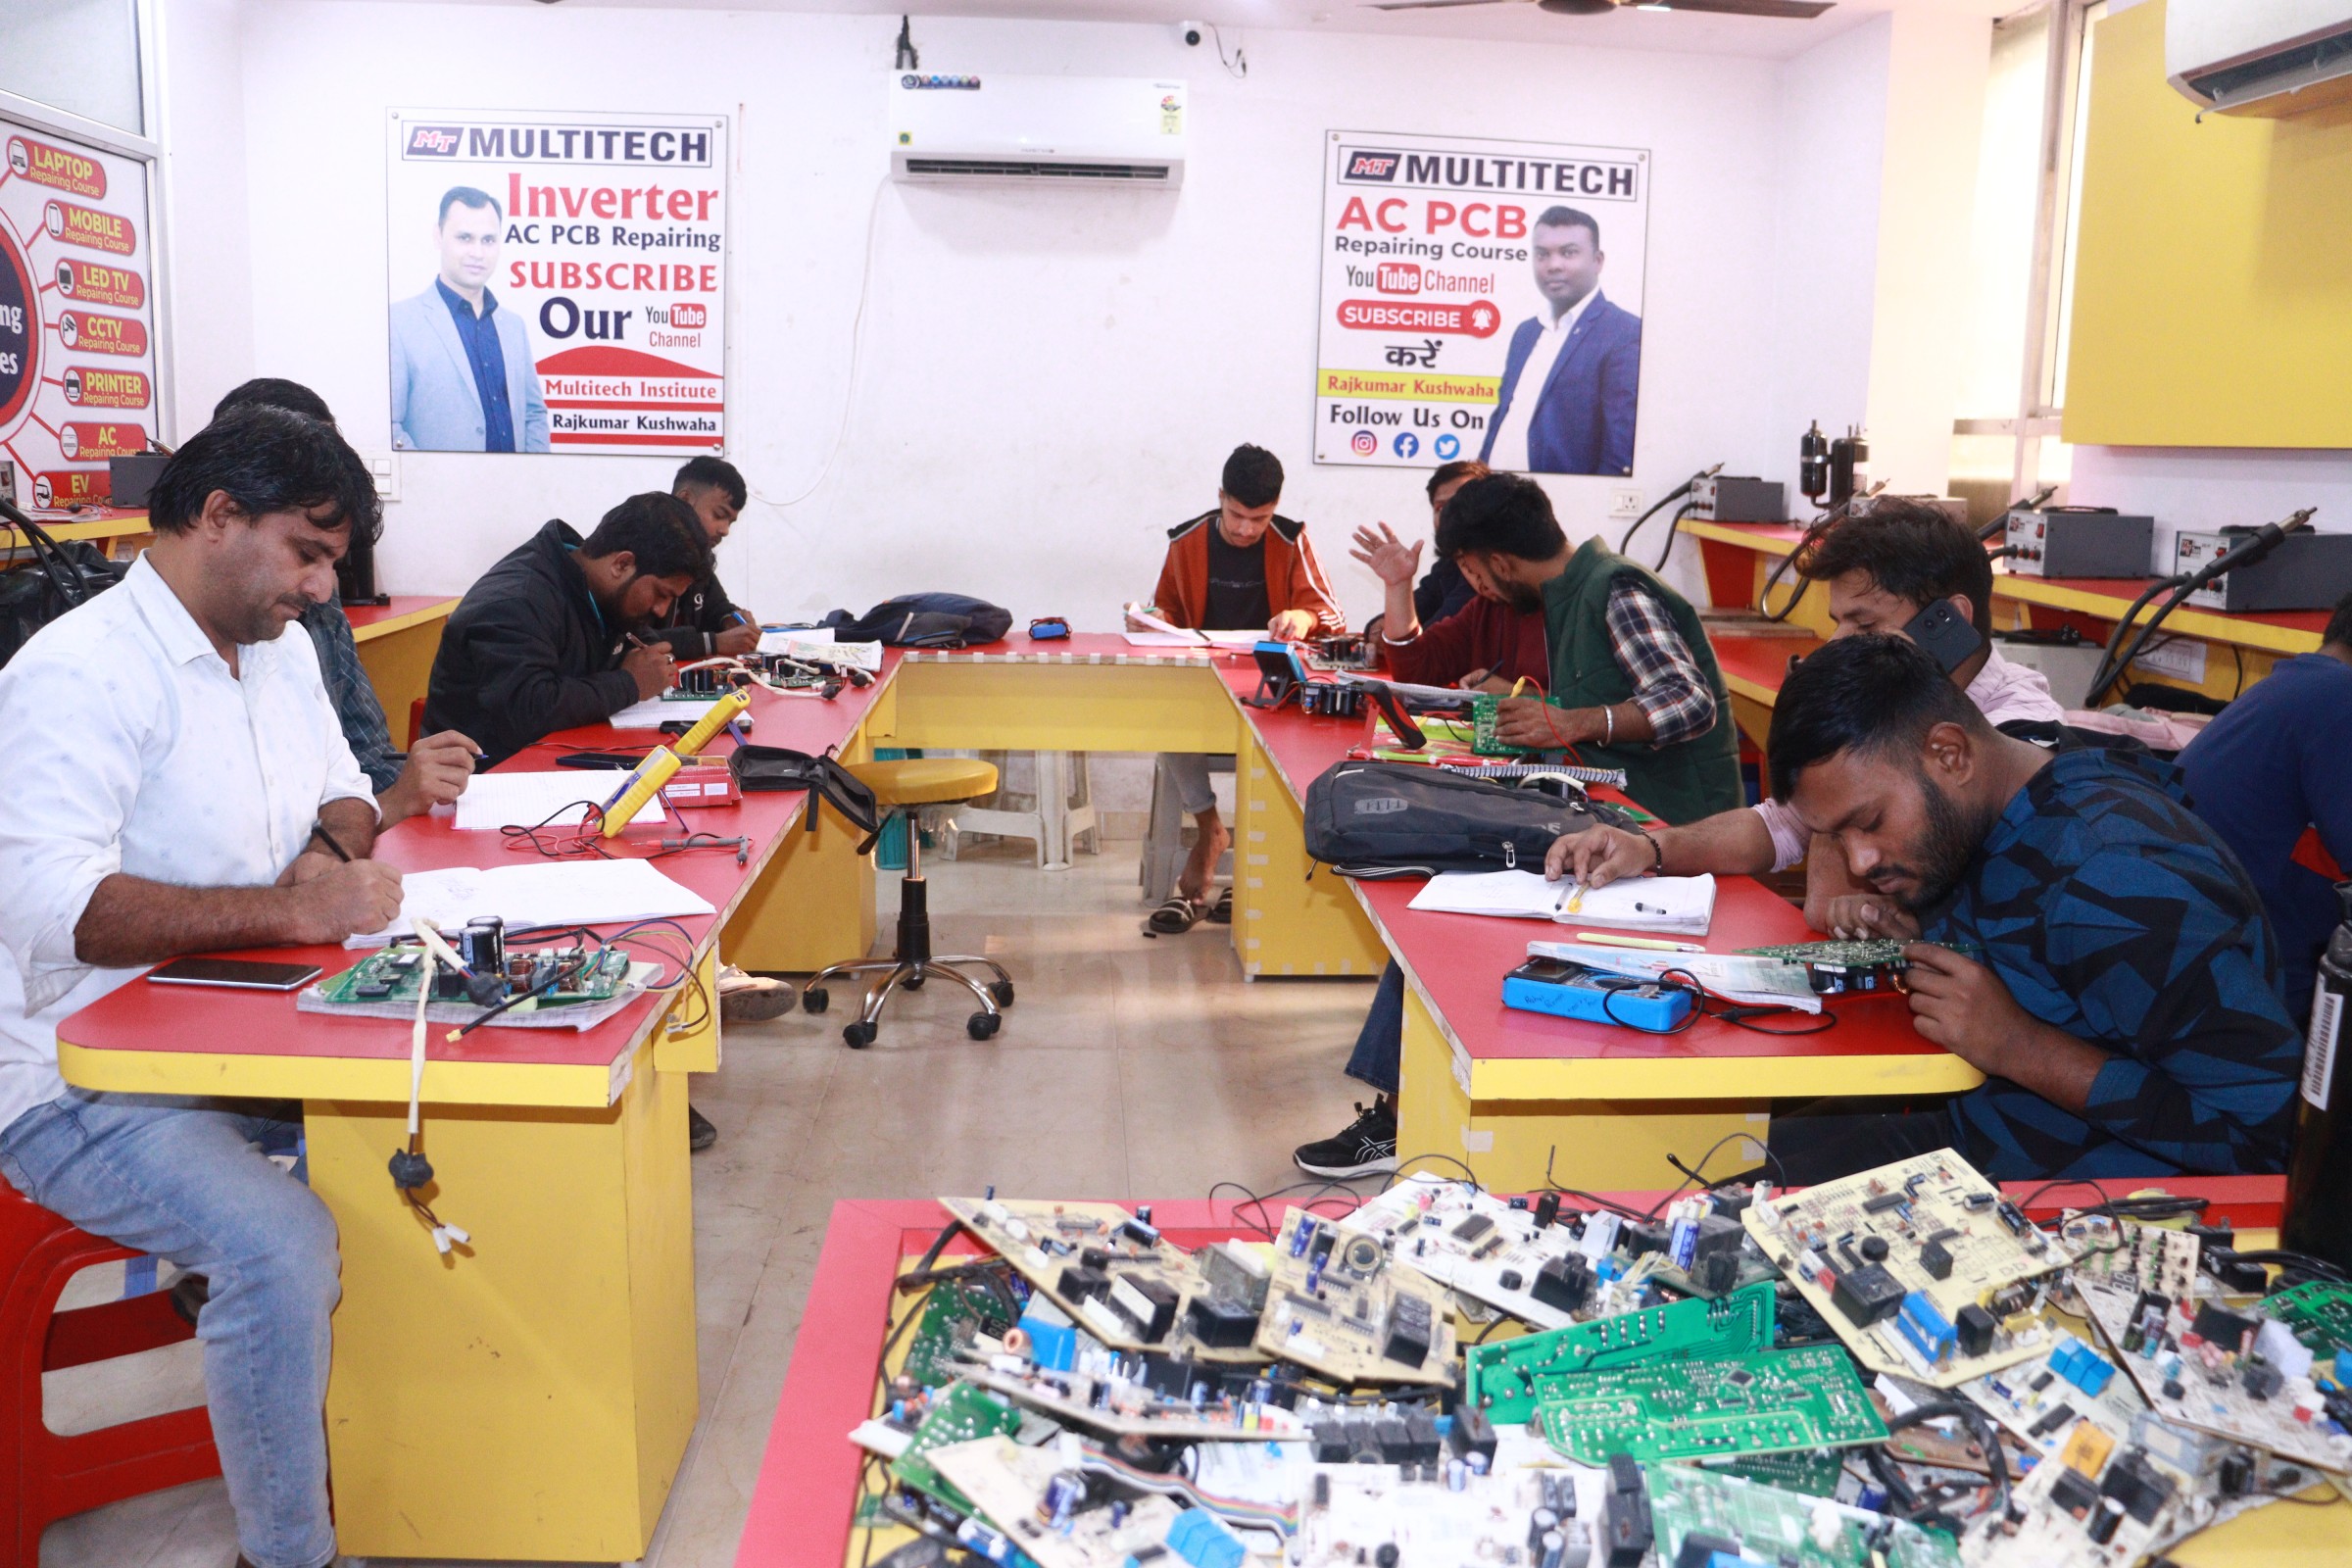 Inverter AC PCB Repairing Course | Expert Training and Certification